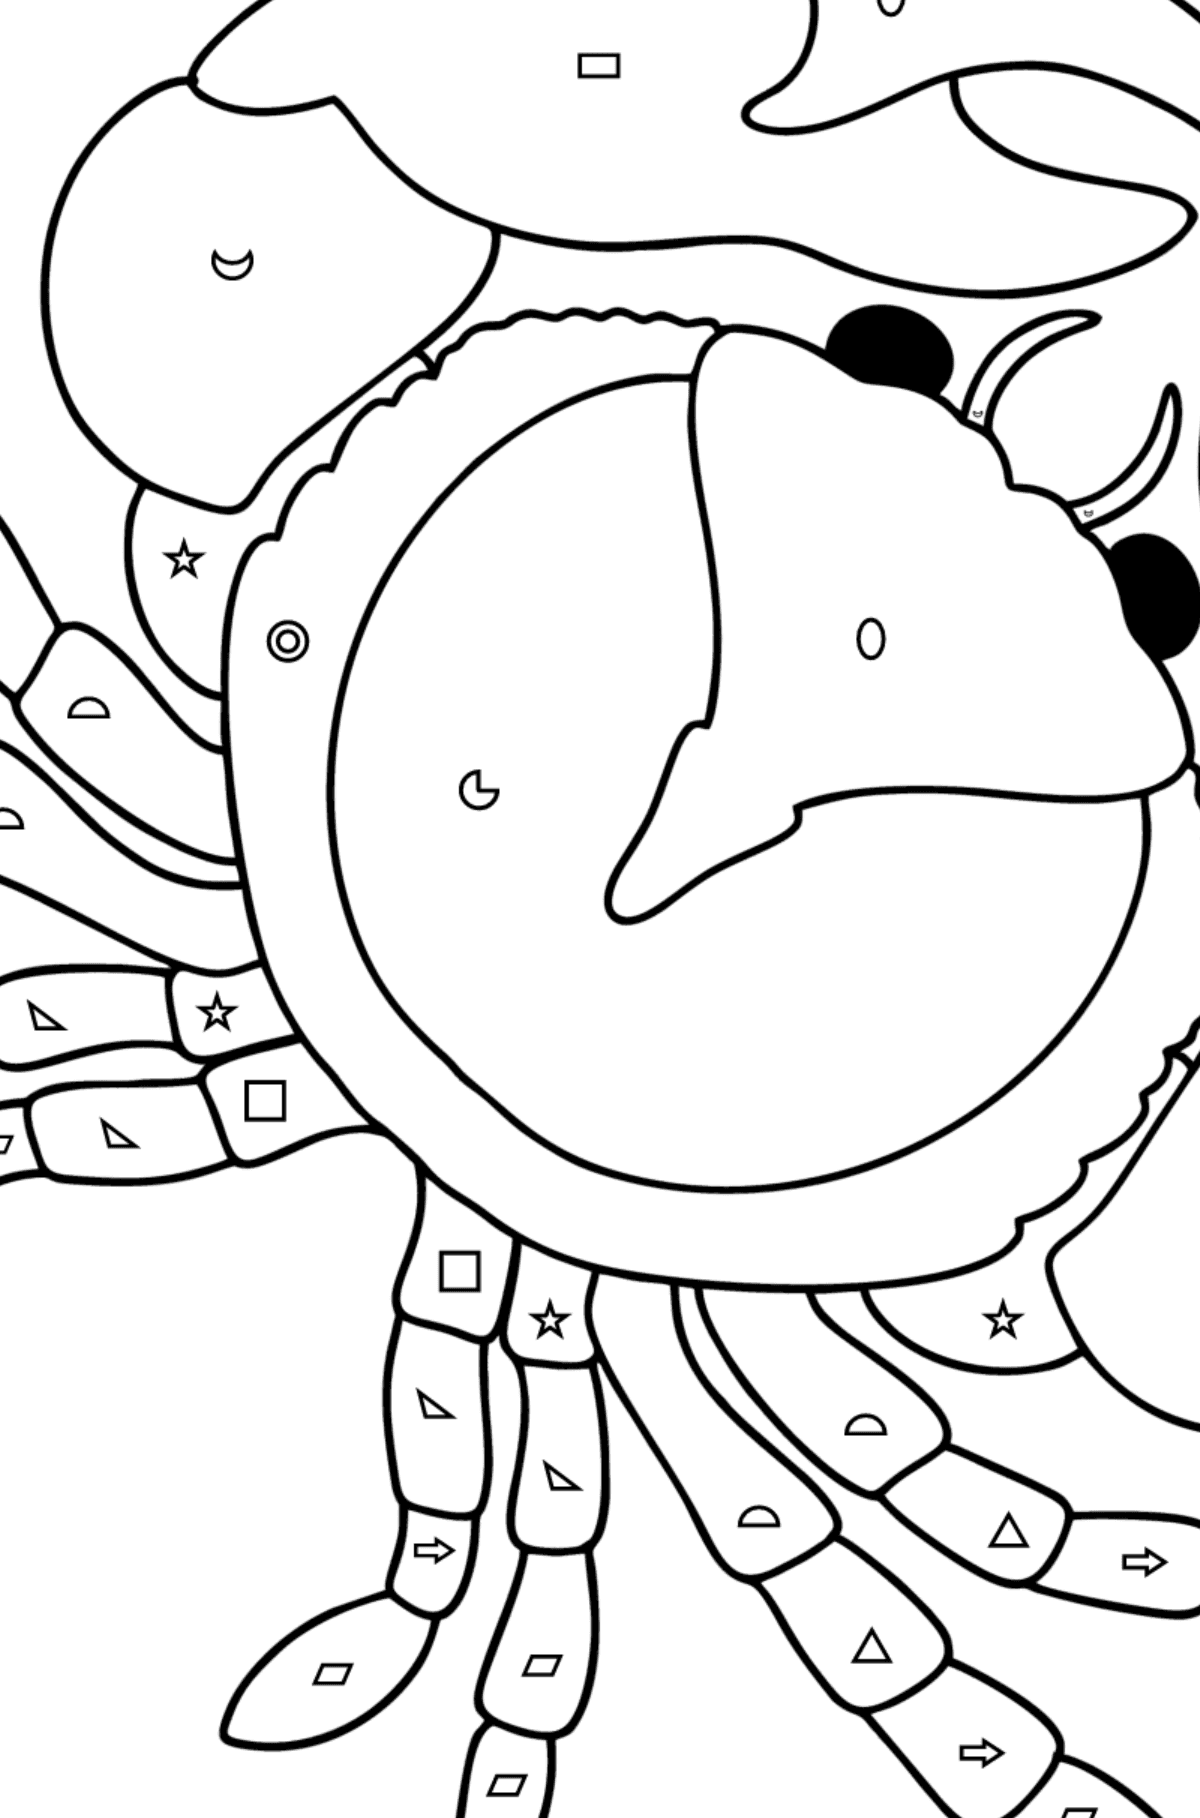 Sea ​​crab coloring page - Coloring by Geometric Shapes for Kids